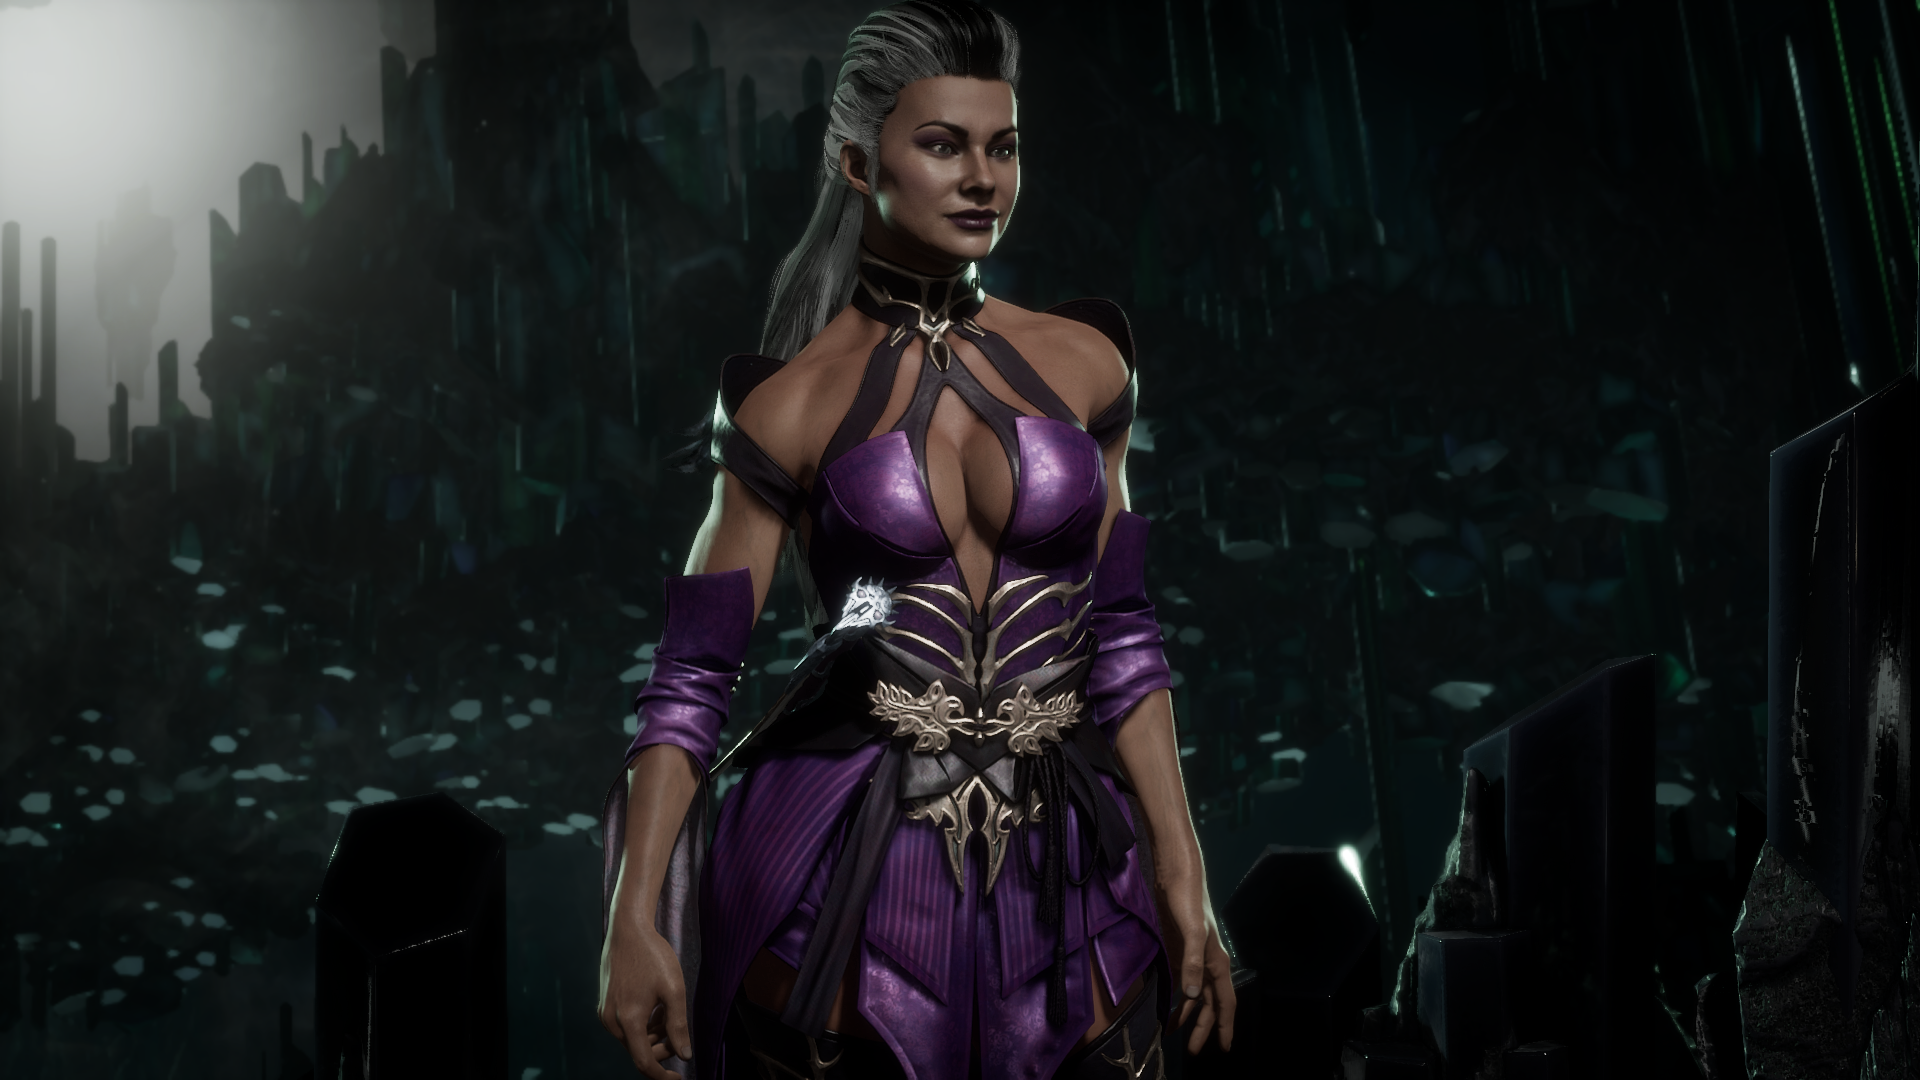 NRS did Such a Fantastic Job With Sindel in MK11